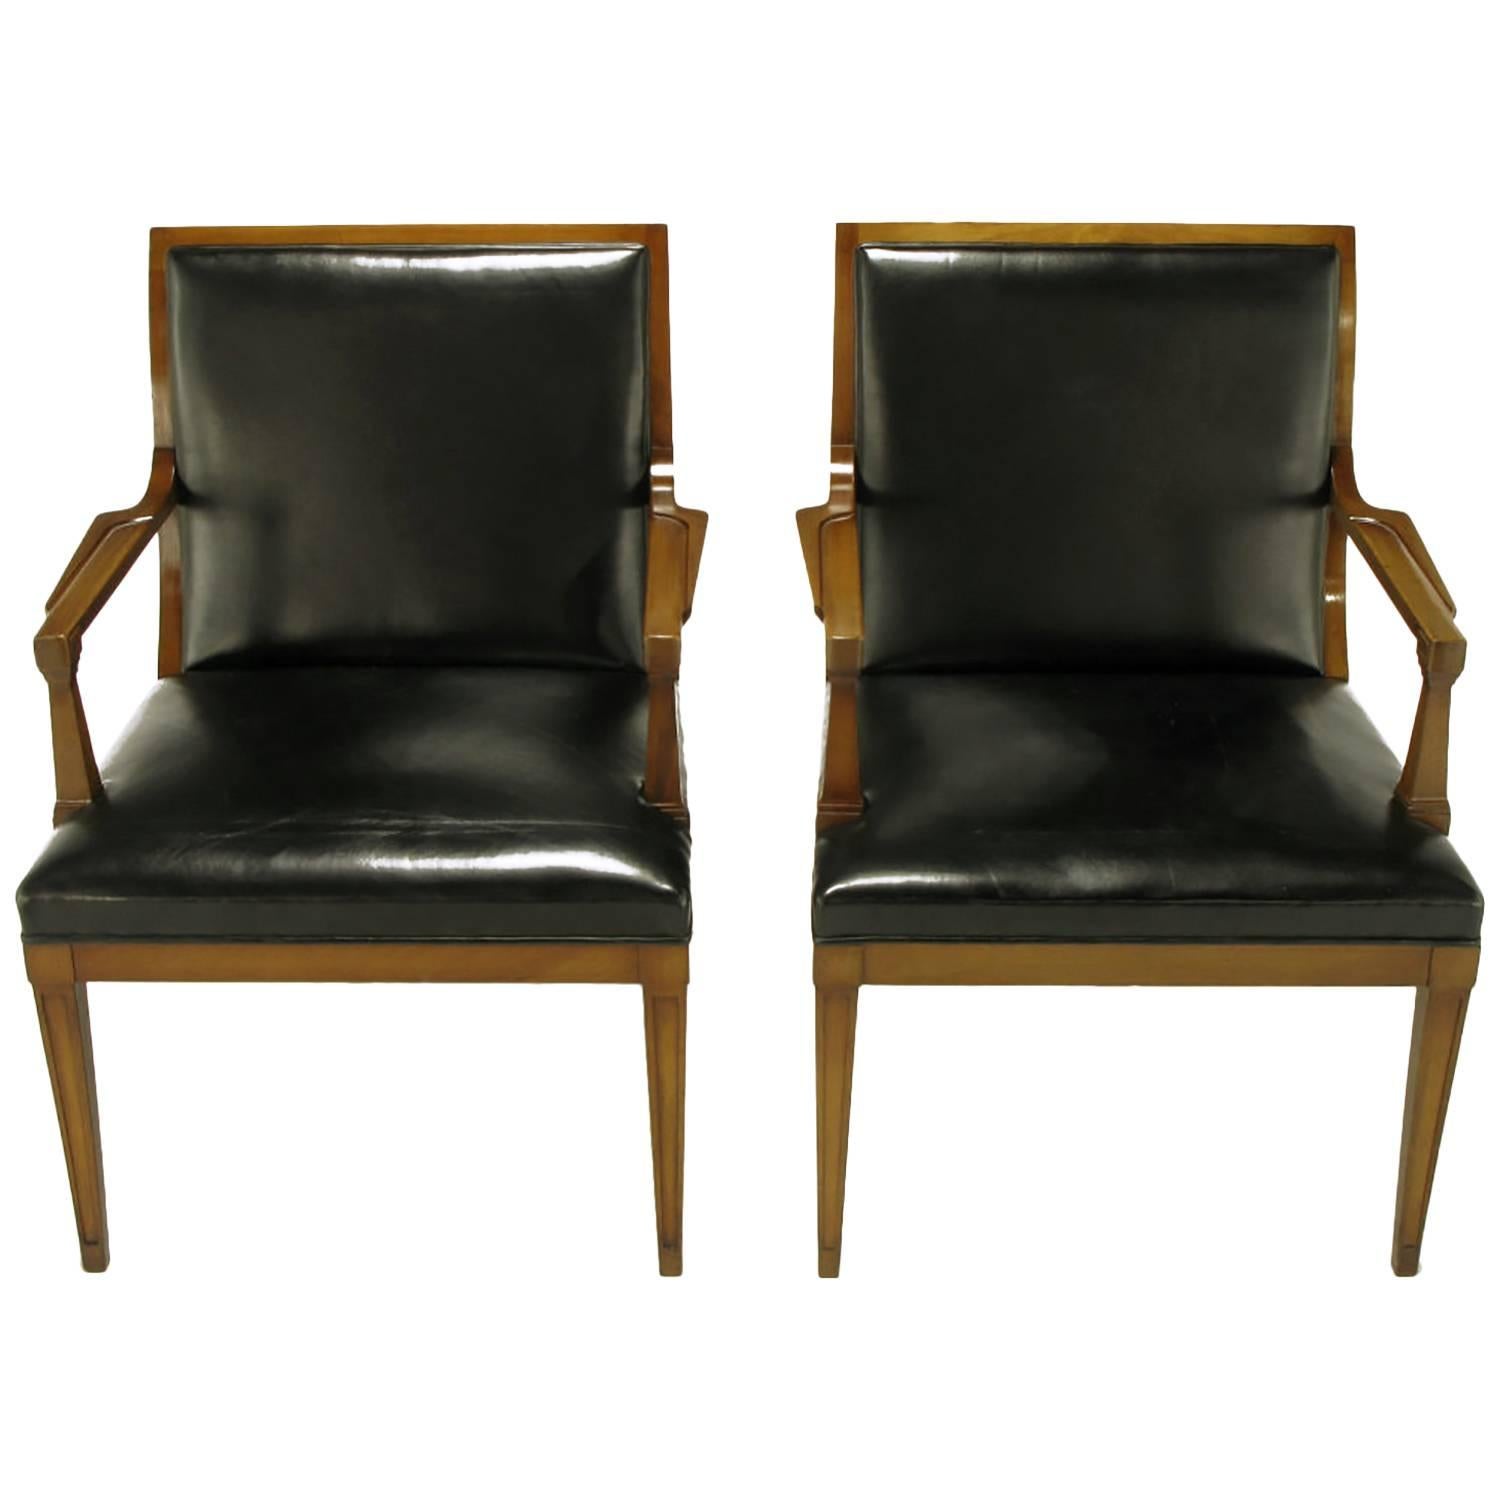 Pair of Stow Davis Black Leather and Walnut Sculptural Armchairs